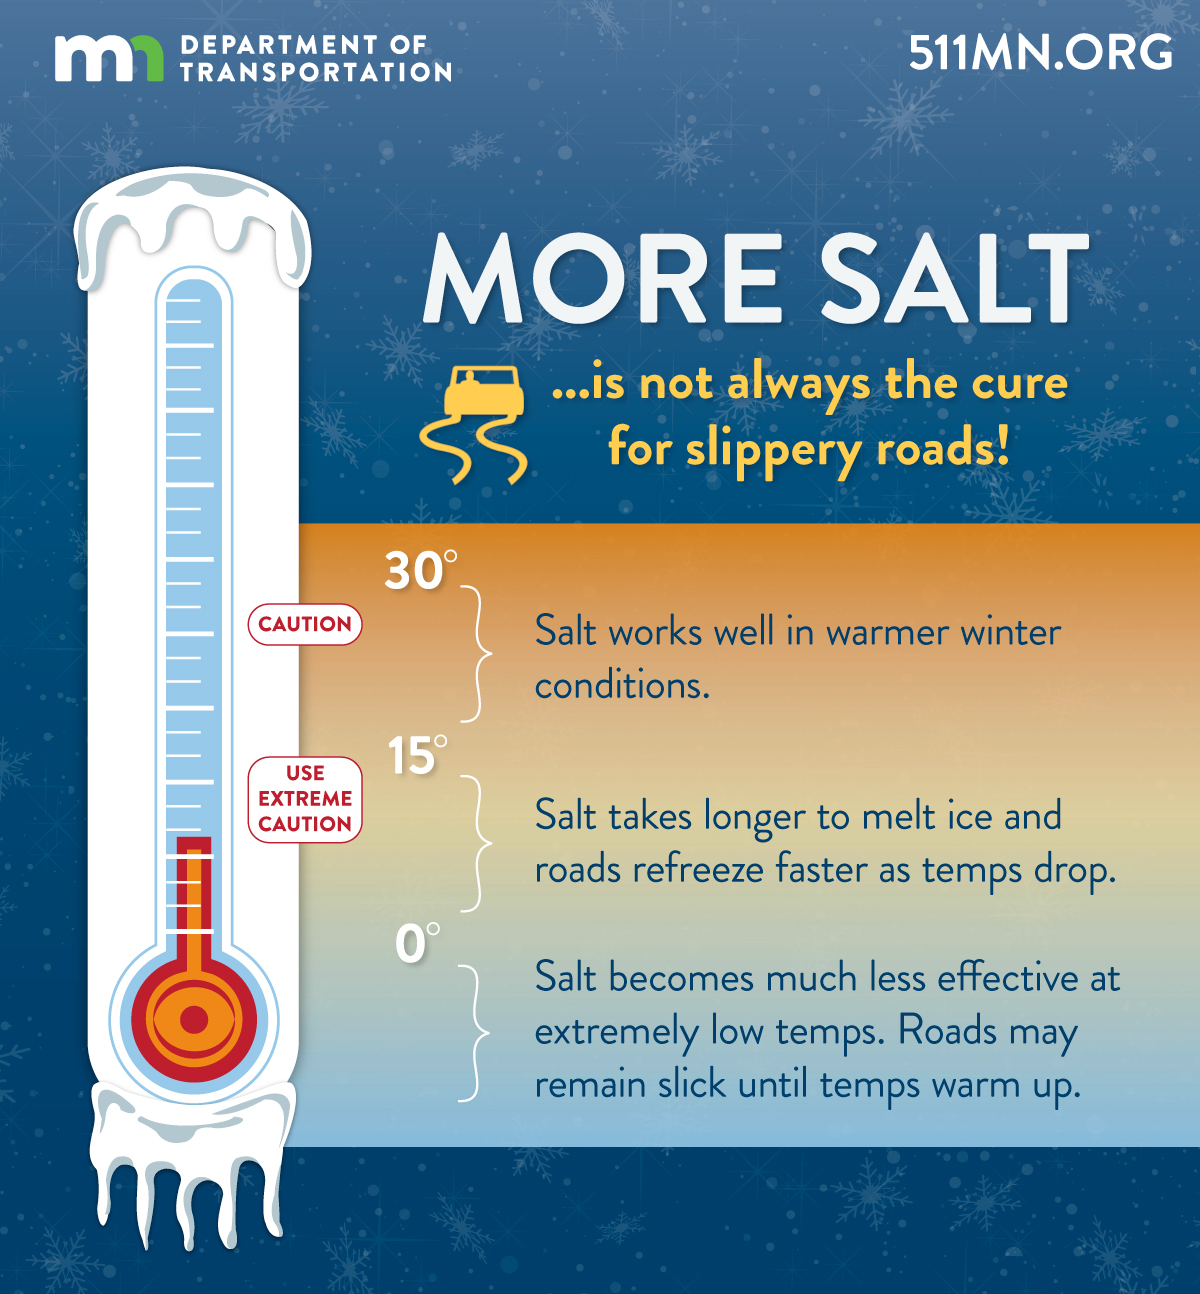 More salt is not always the cure for slippery roads. 30-15 degrees: Salt works well in warmer winter conditions. 0-15 degrees: Salt takes longer to melt ice and roads refreeze faster as temps drop. 0 and below: Salt becomes much less effective at extremely low temps. Roads may remain slick until temps warm up.